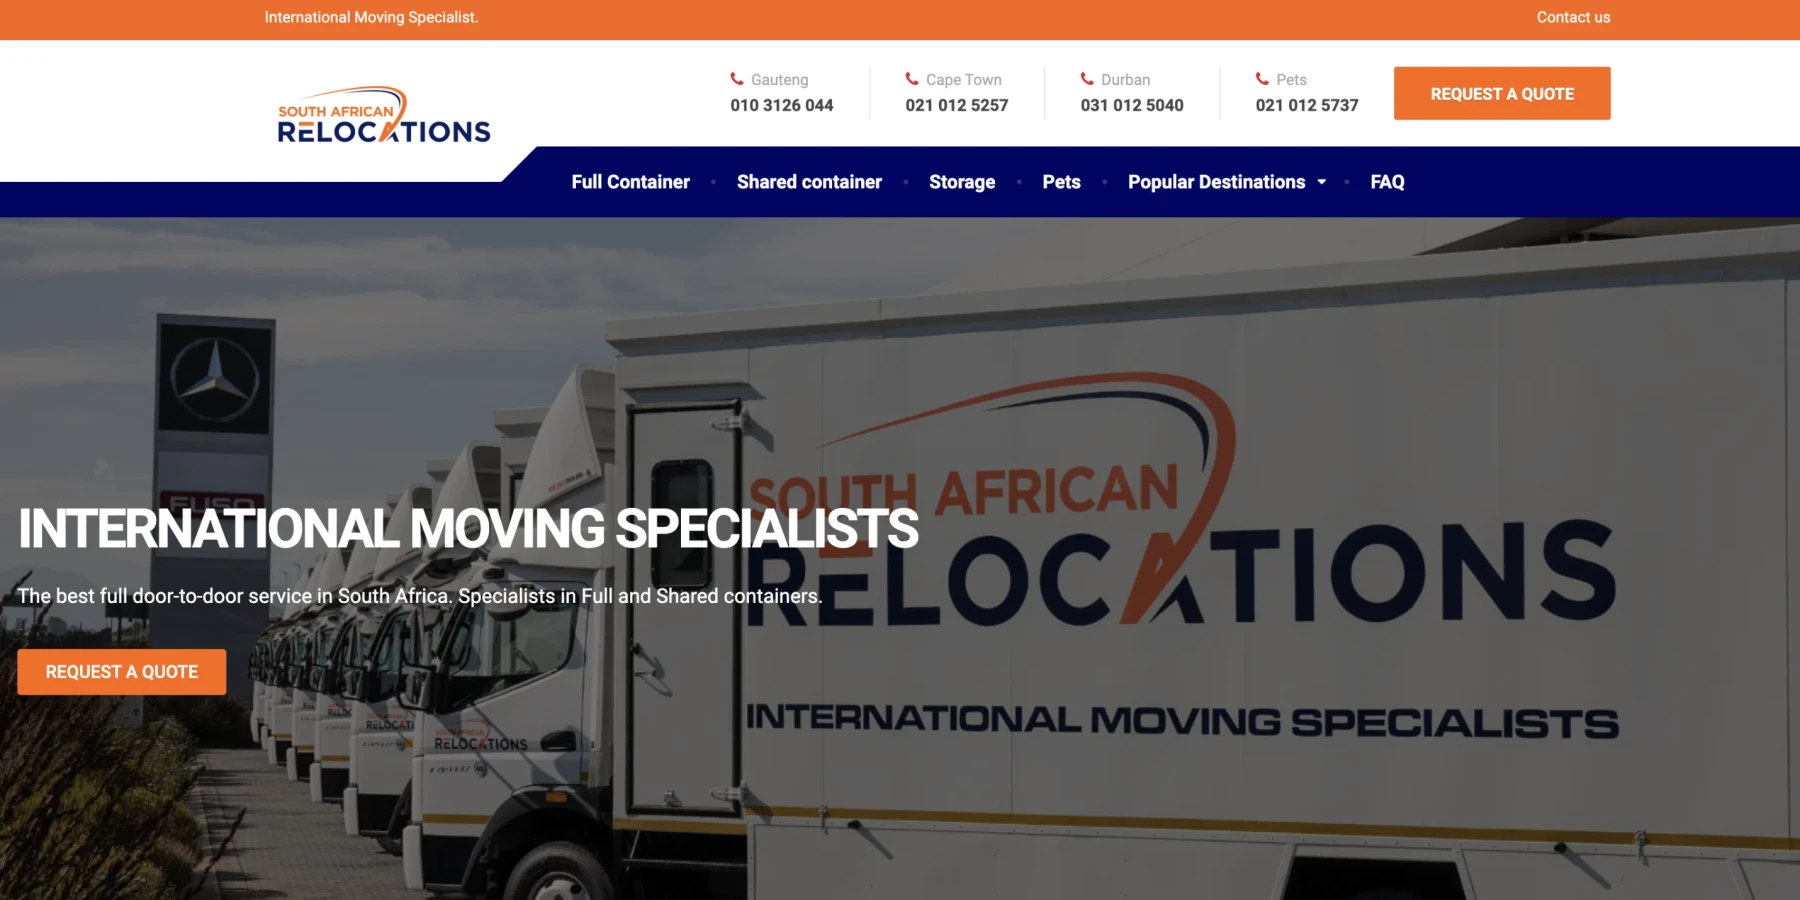 South African Relocations